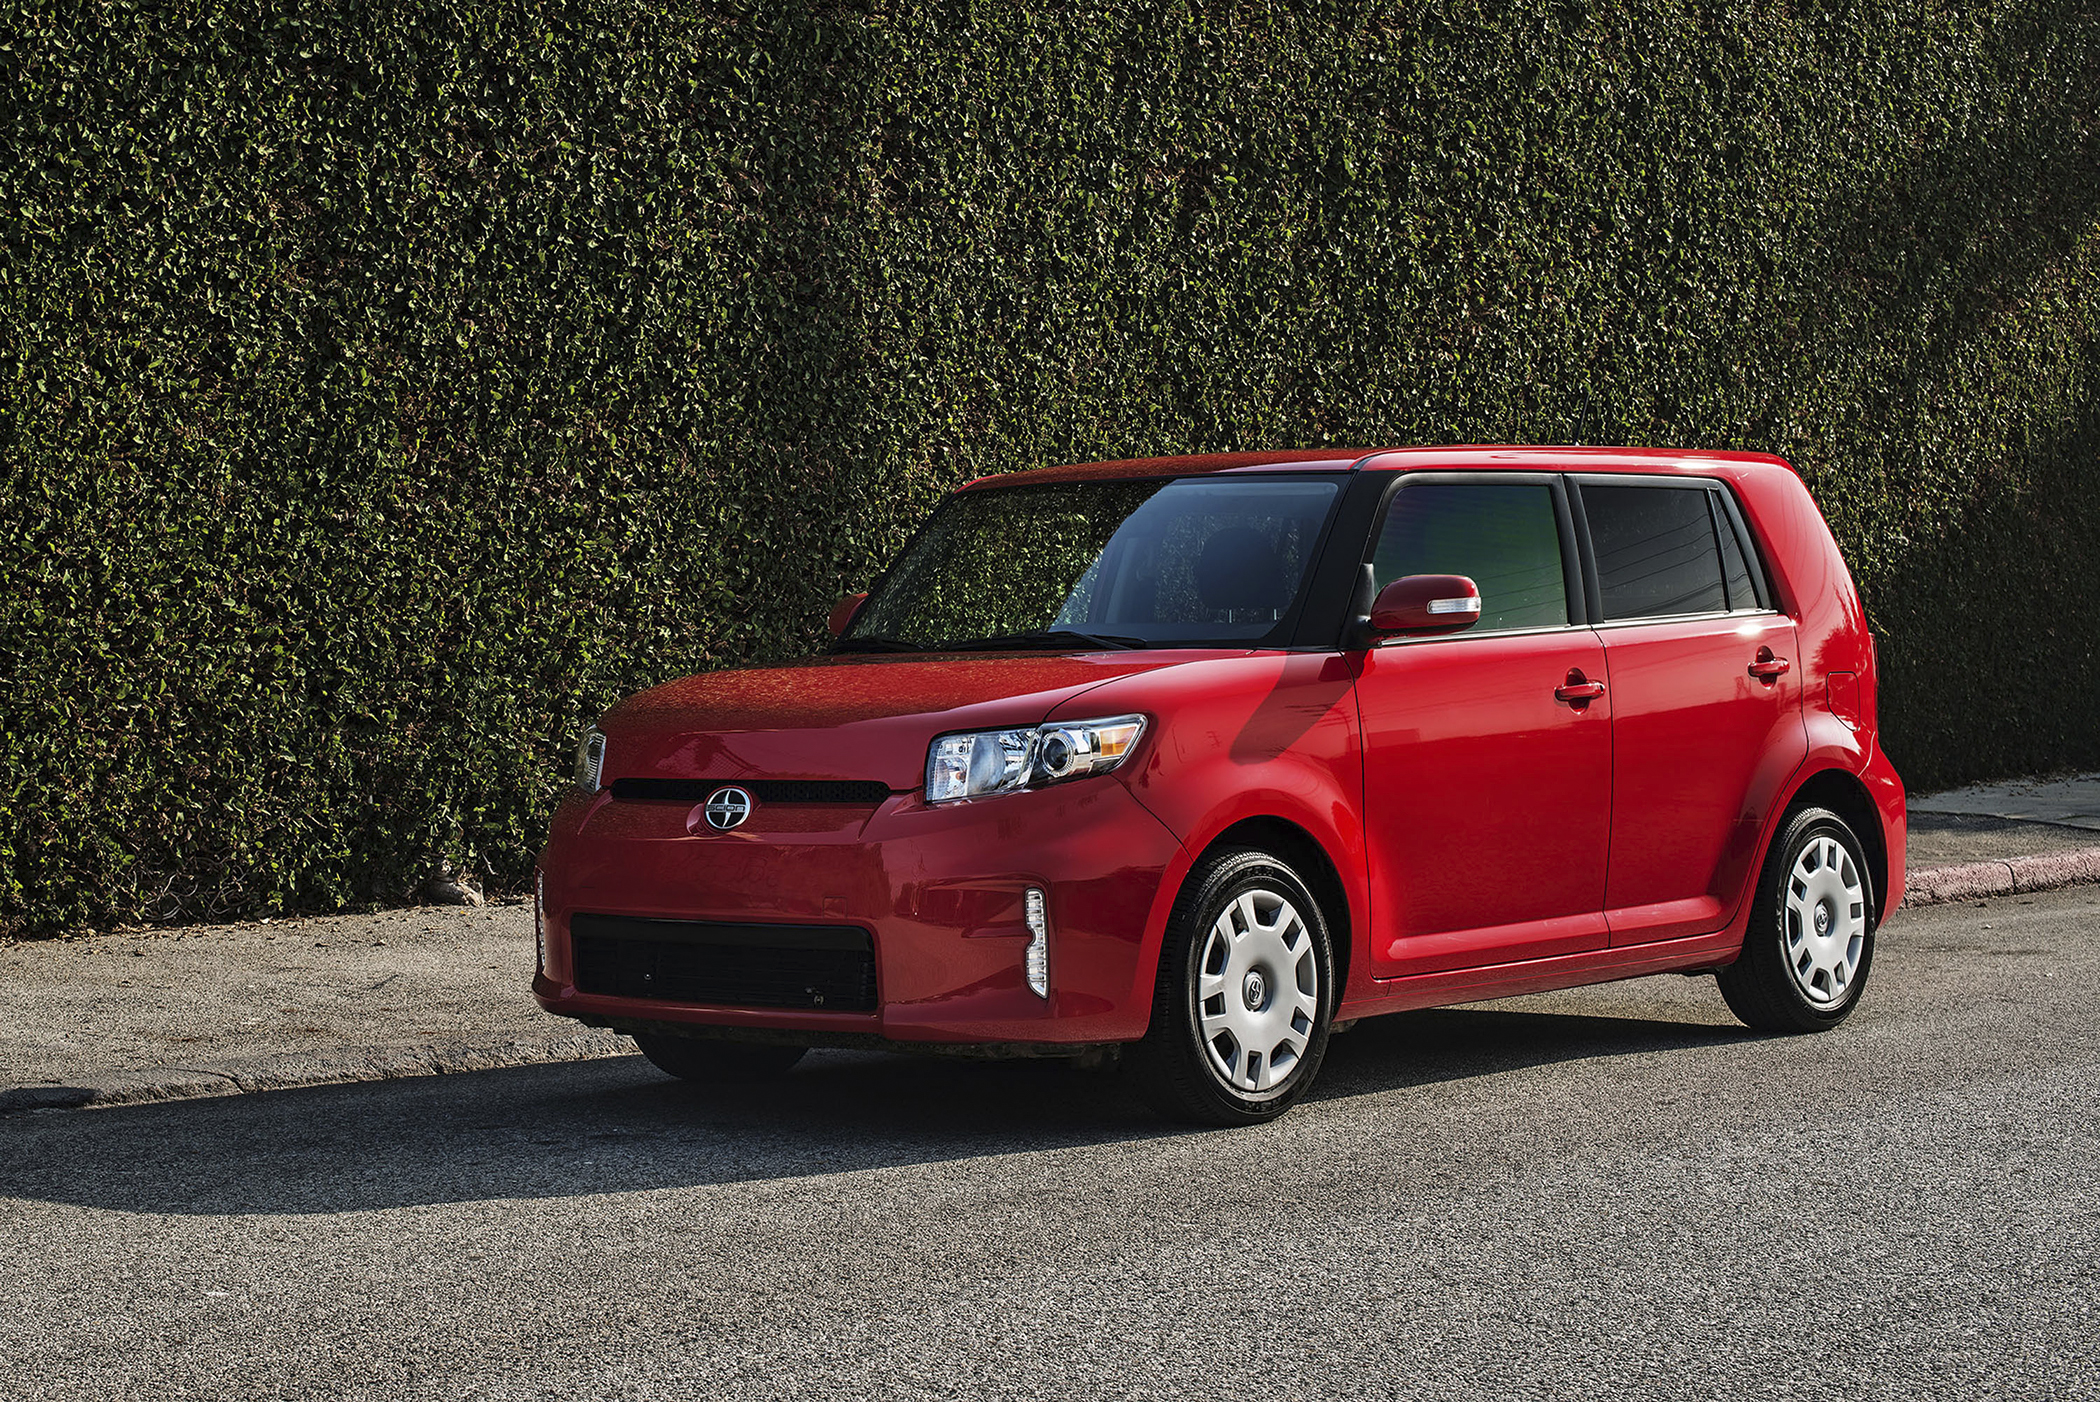 <strong>Best Wagon: </strong>The <a href="http://www.edmunds.com/scion/xb/2015/" target="_blank">Scion xB</a> makes Edmunds' Best Retained Value list for the non-luxury wagon segment three times since 2011. On average, buyers pay less than $20,000 for the car up front, but over five years their costs add up to $27,278 when fuel, maintenance and repairs, and tax fees are considered. Over five years, the Scion xB depreciates 30%.